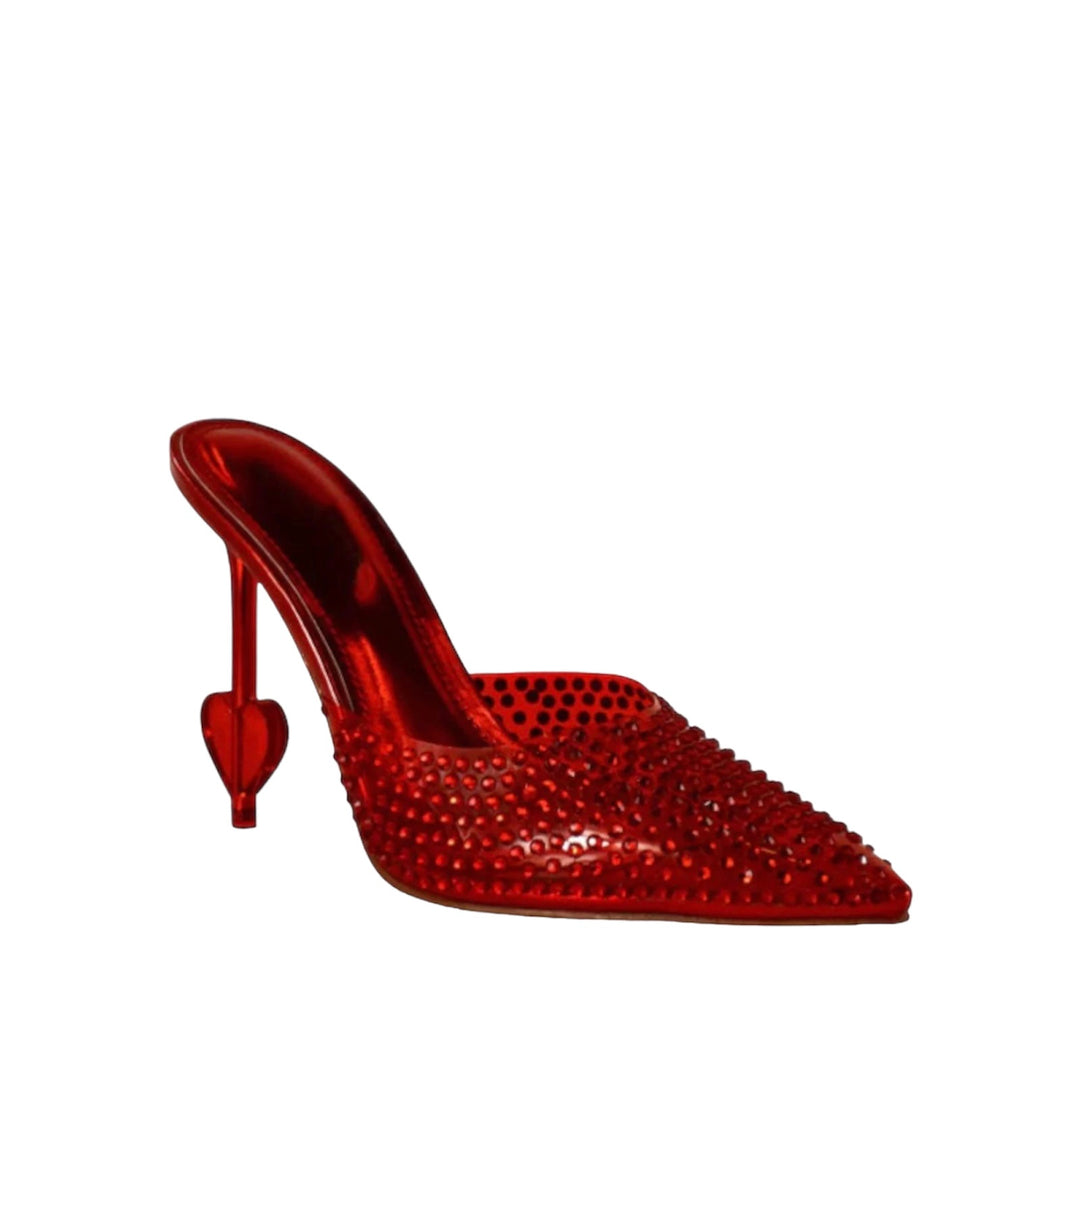 Cupids Heart Red Bling heels, Size 8.5